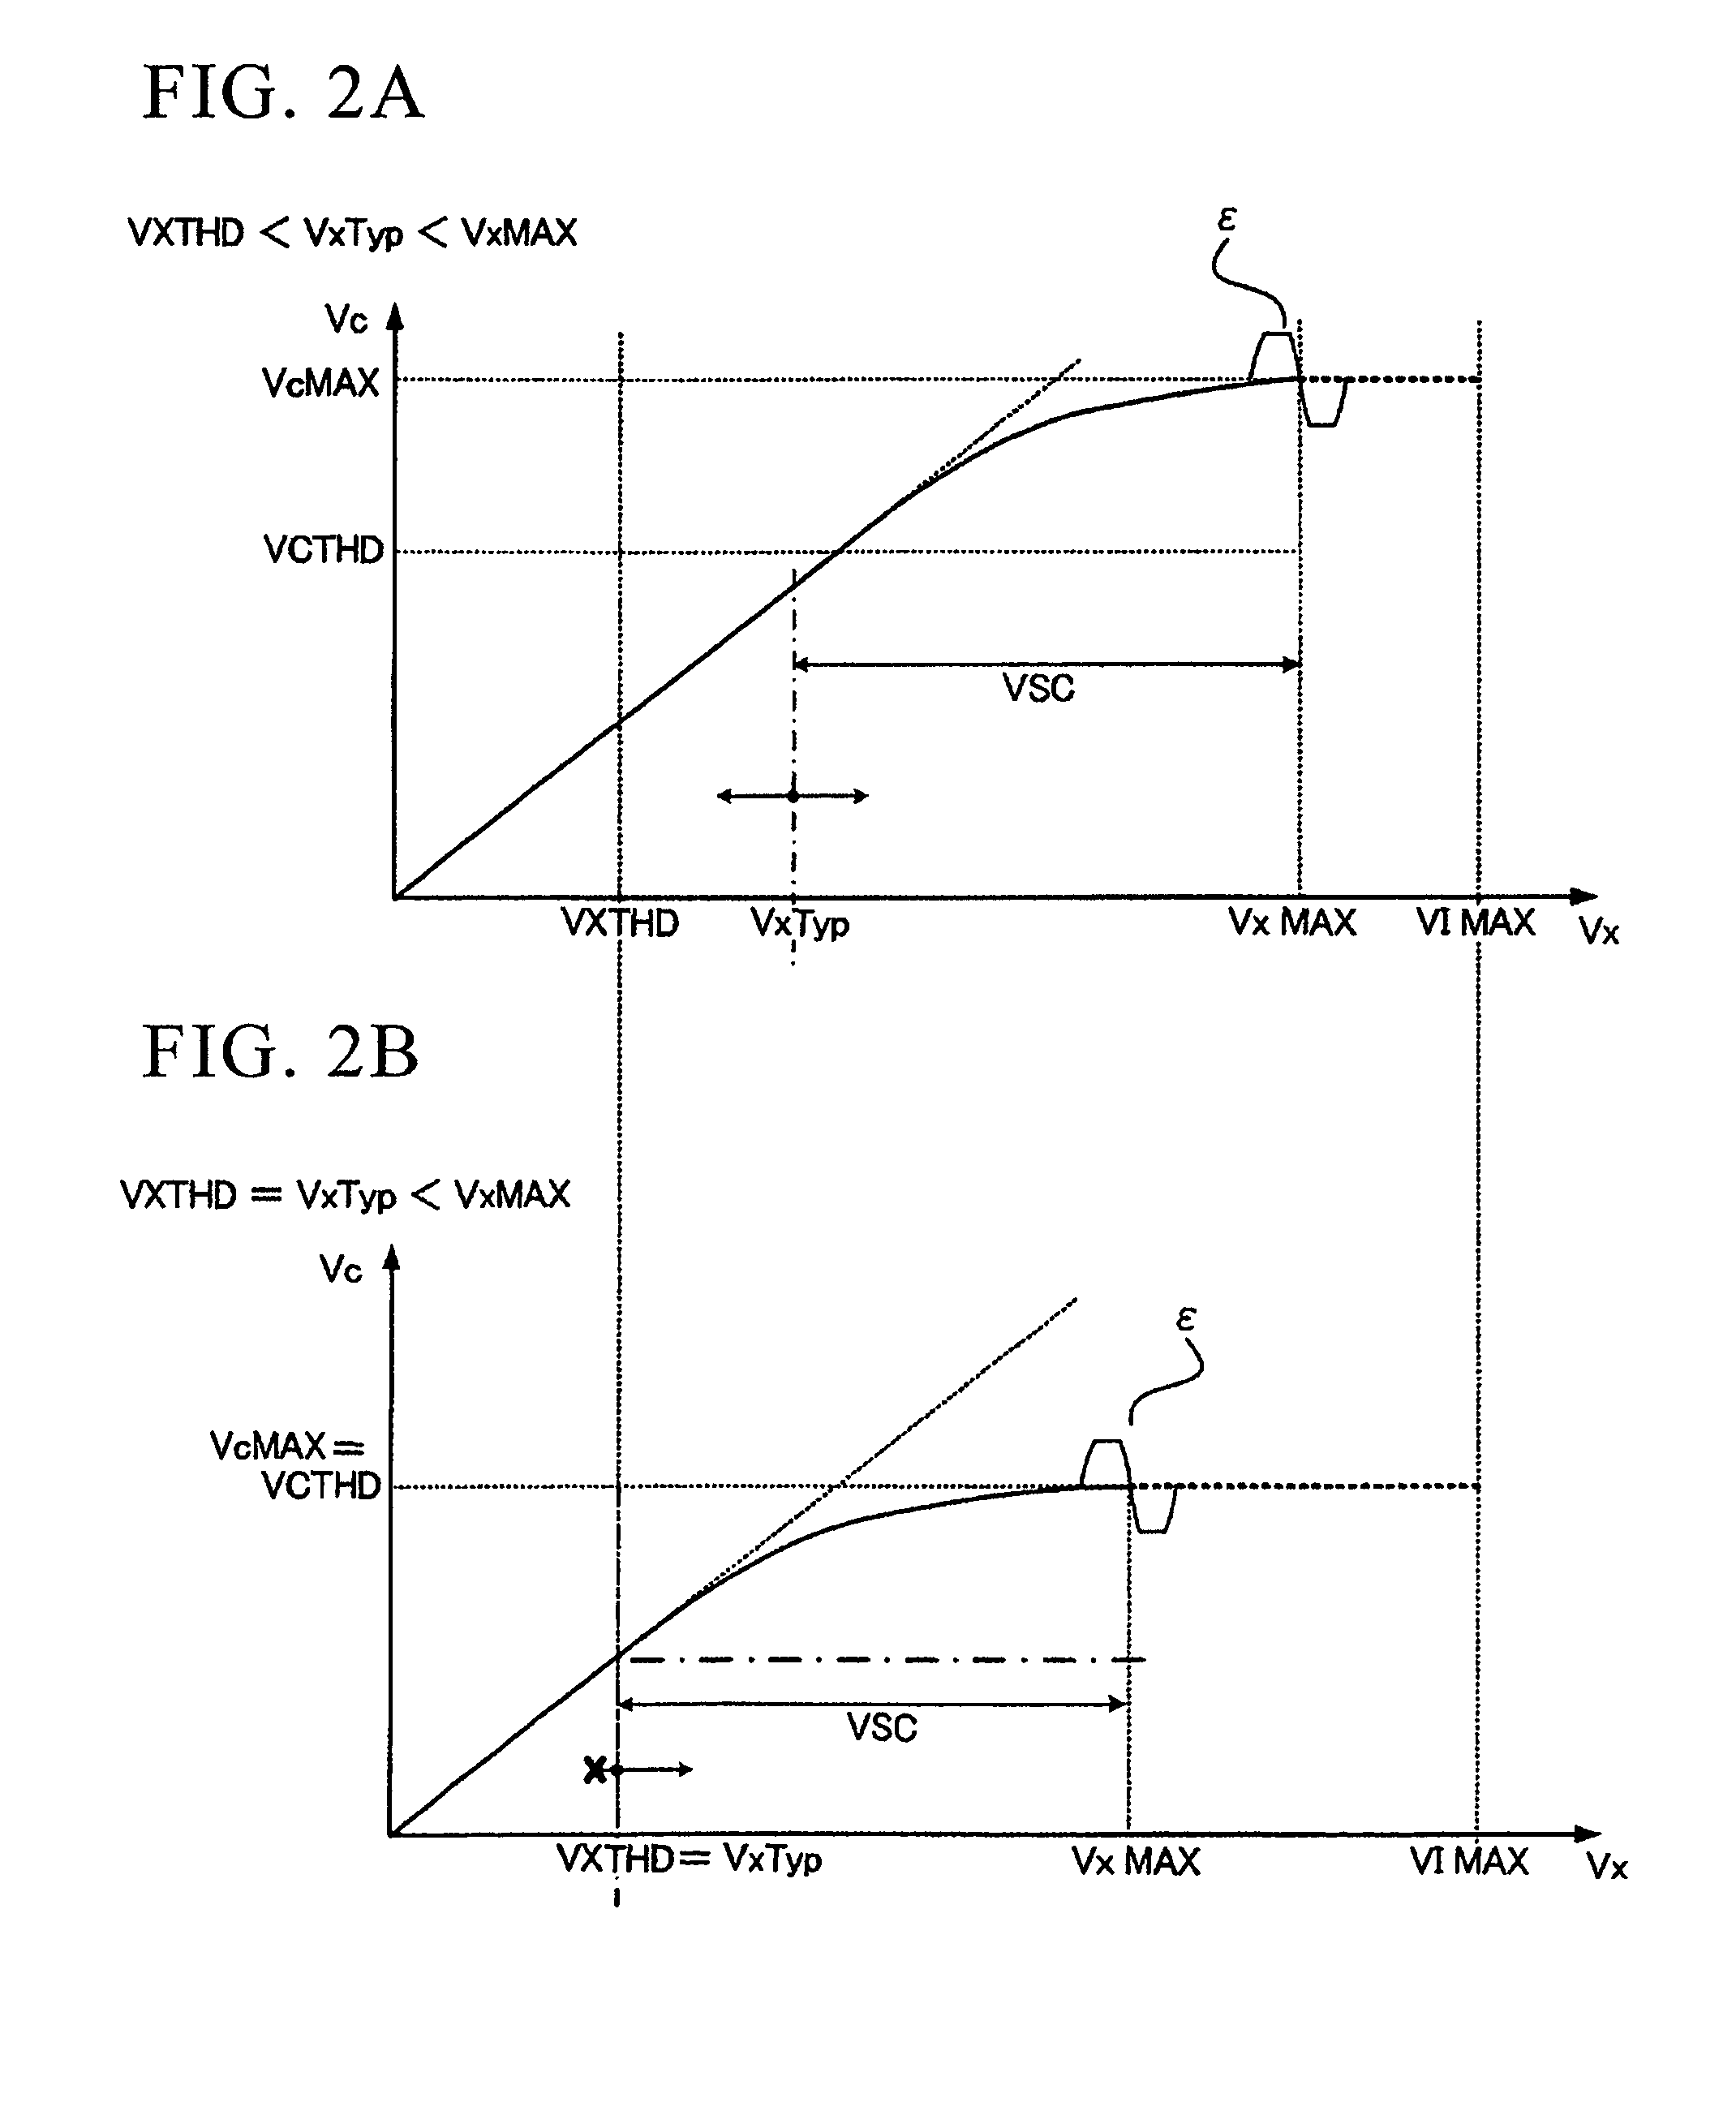 Amplifier circuit utilizing characteristic correction and smooth curvilinear correction